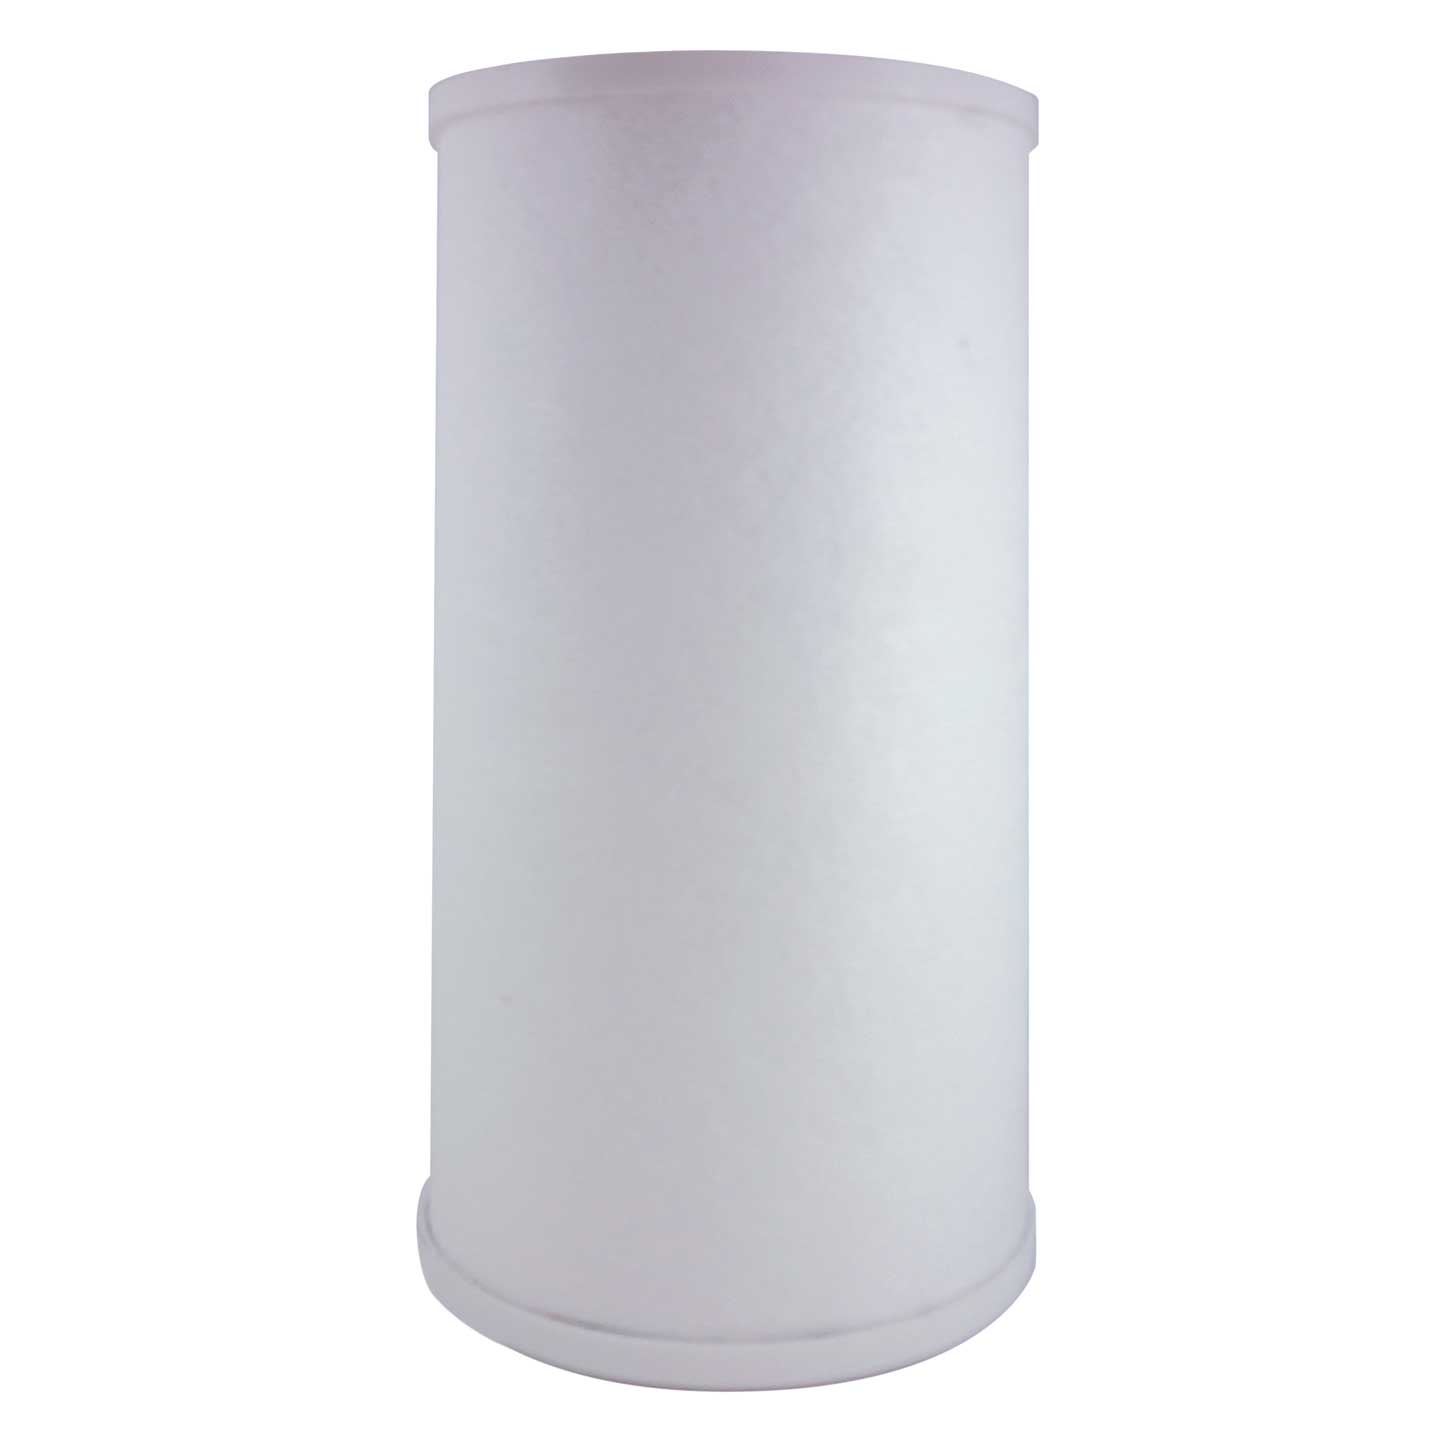 RFC-BBS-D Culligan Comparable Whole House Carbon Water Filter by Tier1 (front)